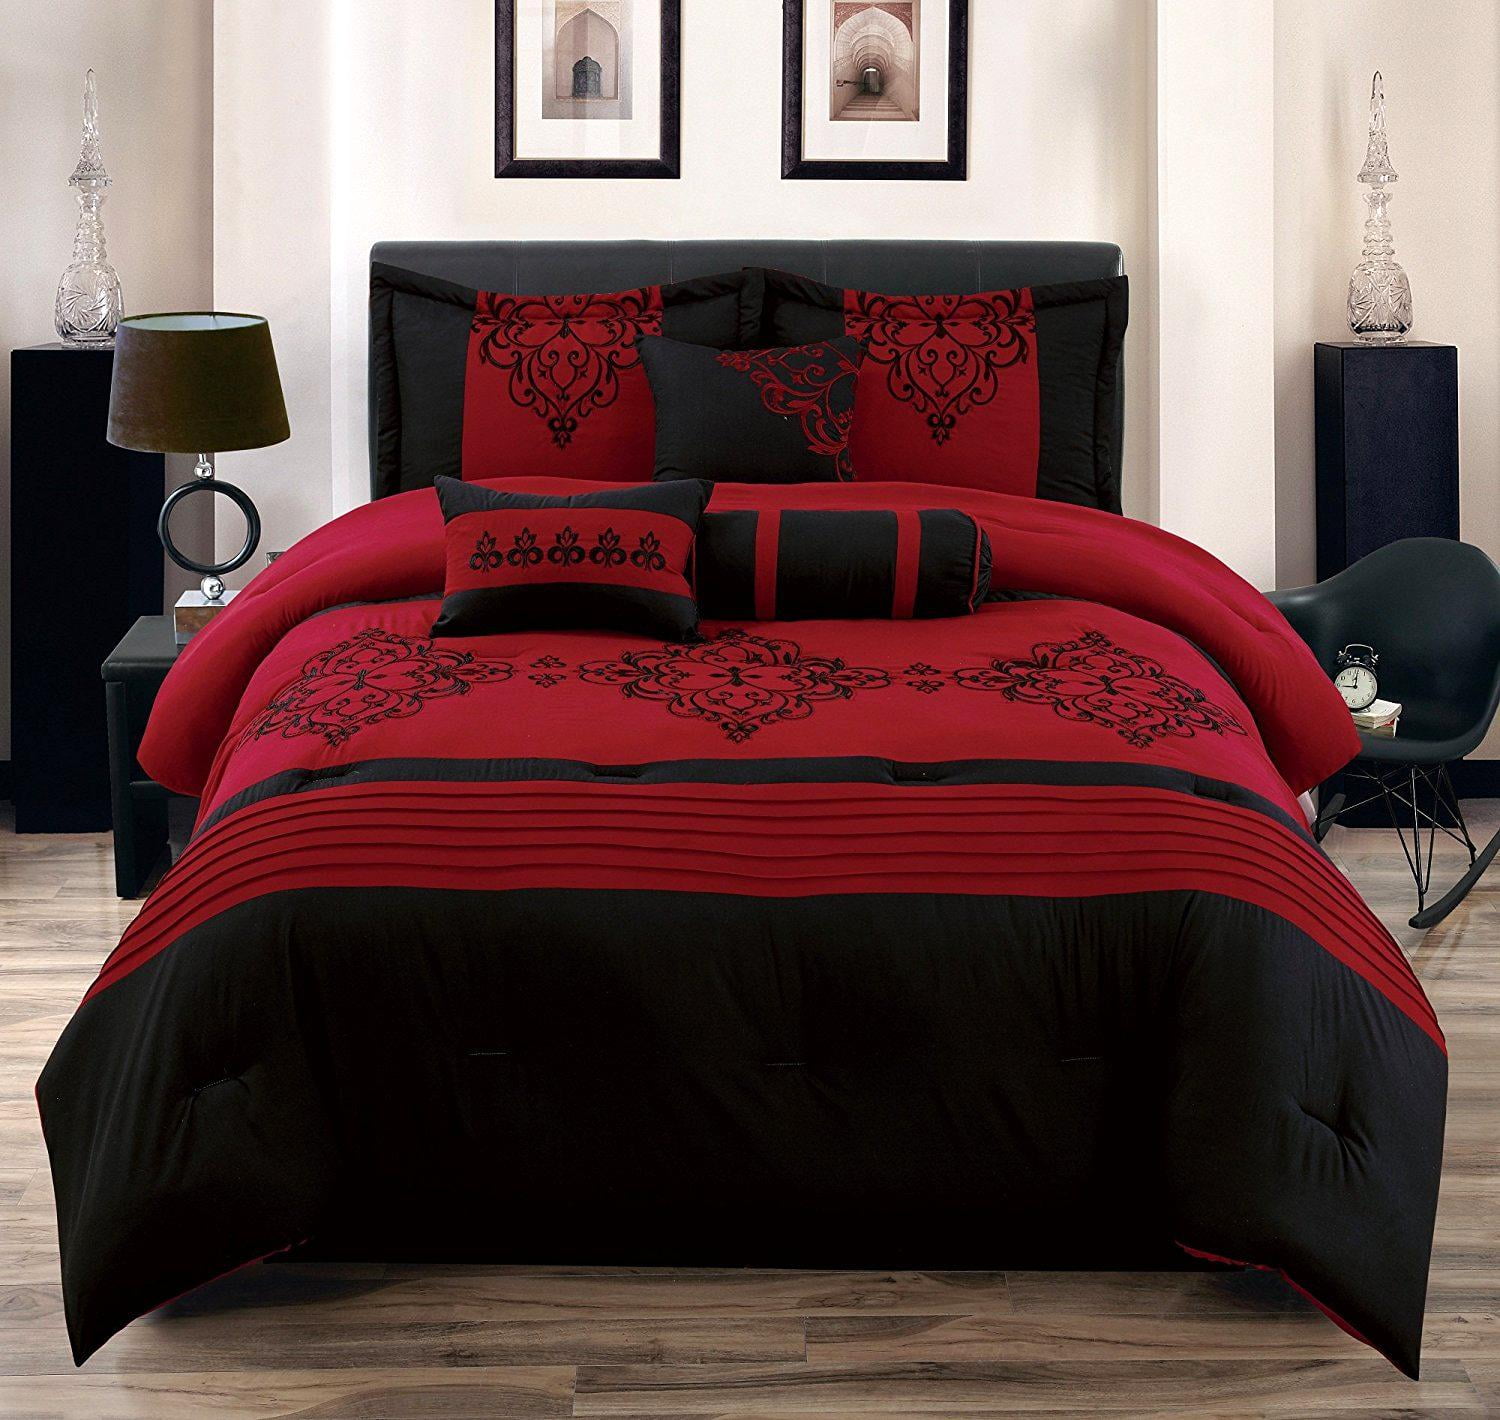 Heba Full Size 8-Piece Cotton Touch Comforter Set Red & Black Bed in a